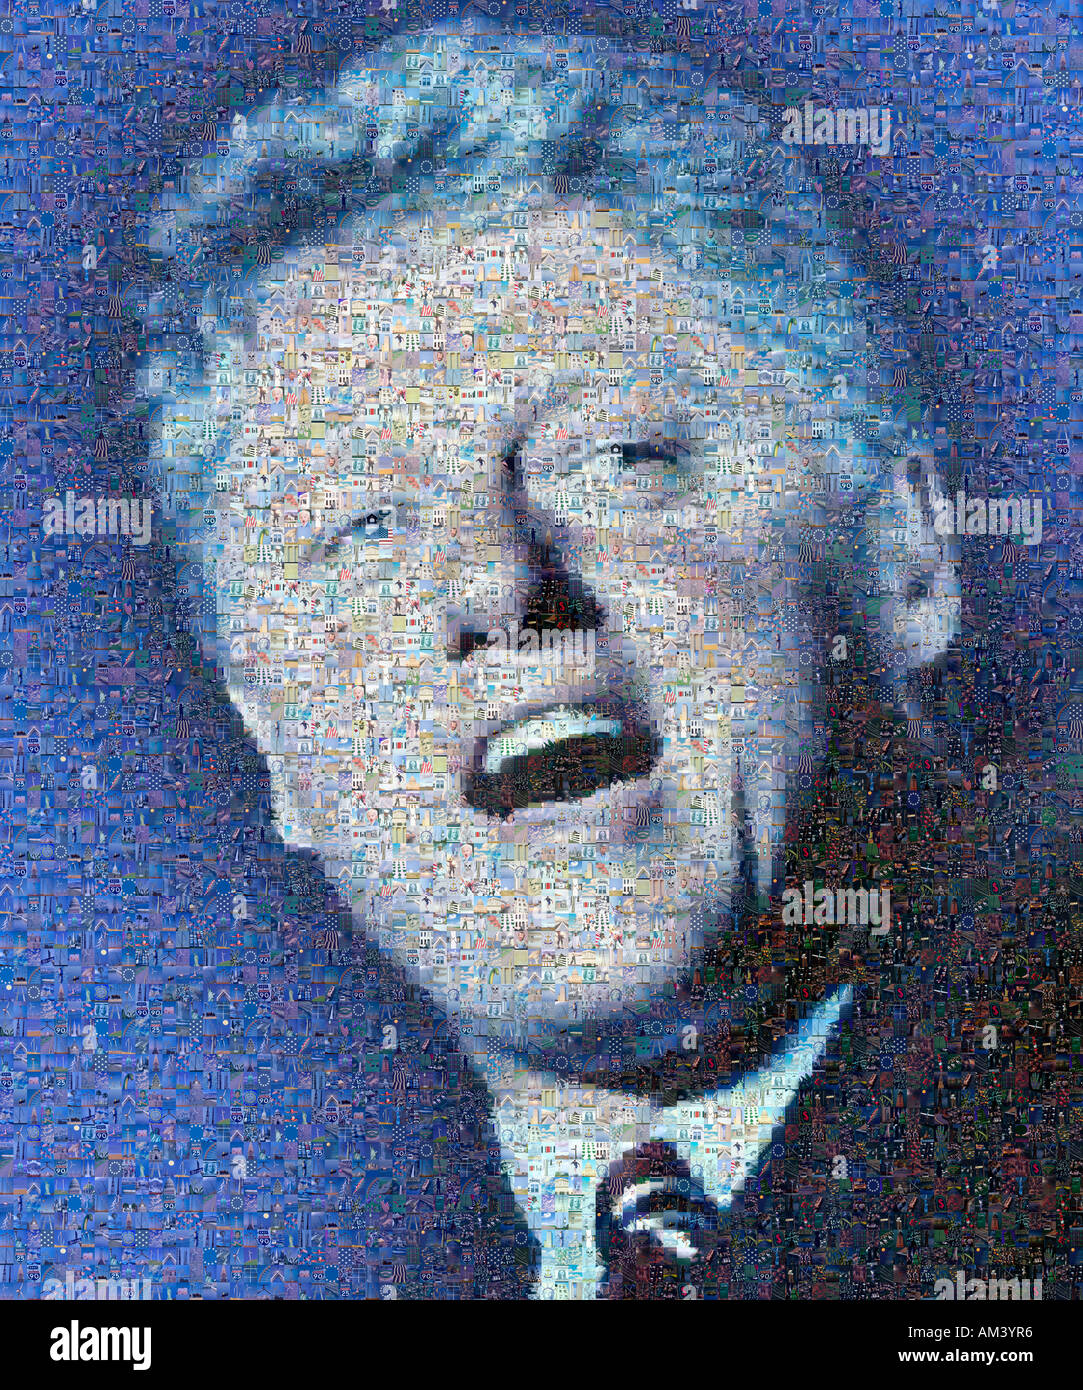 Digital mosaic of small images comprising President Bill Clinton Stock Photo